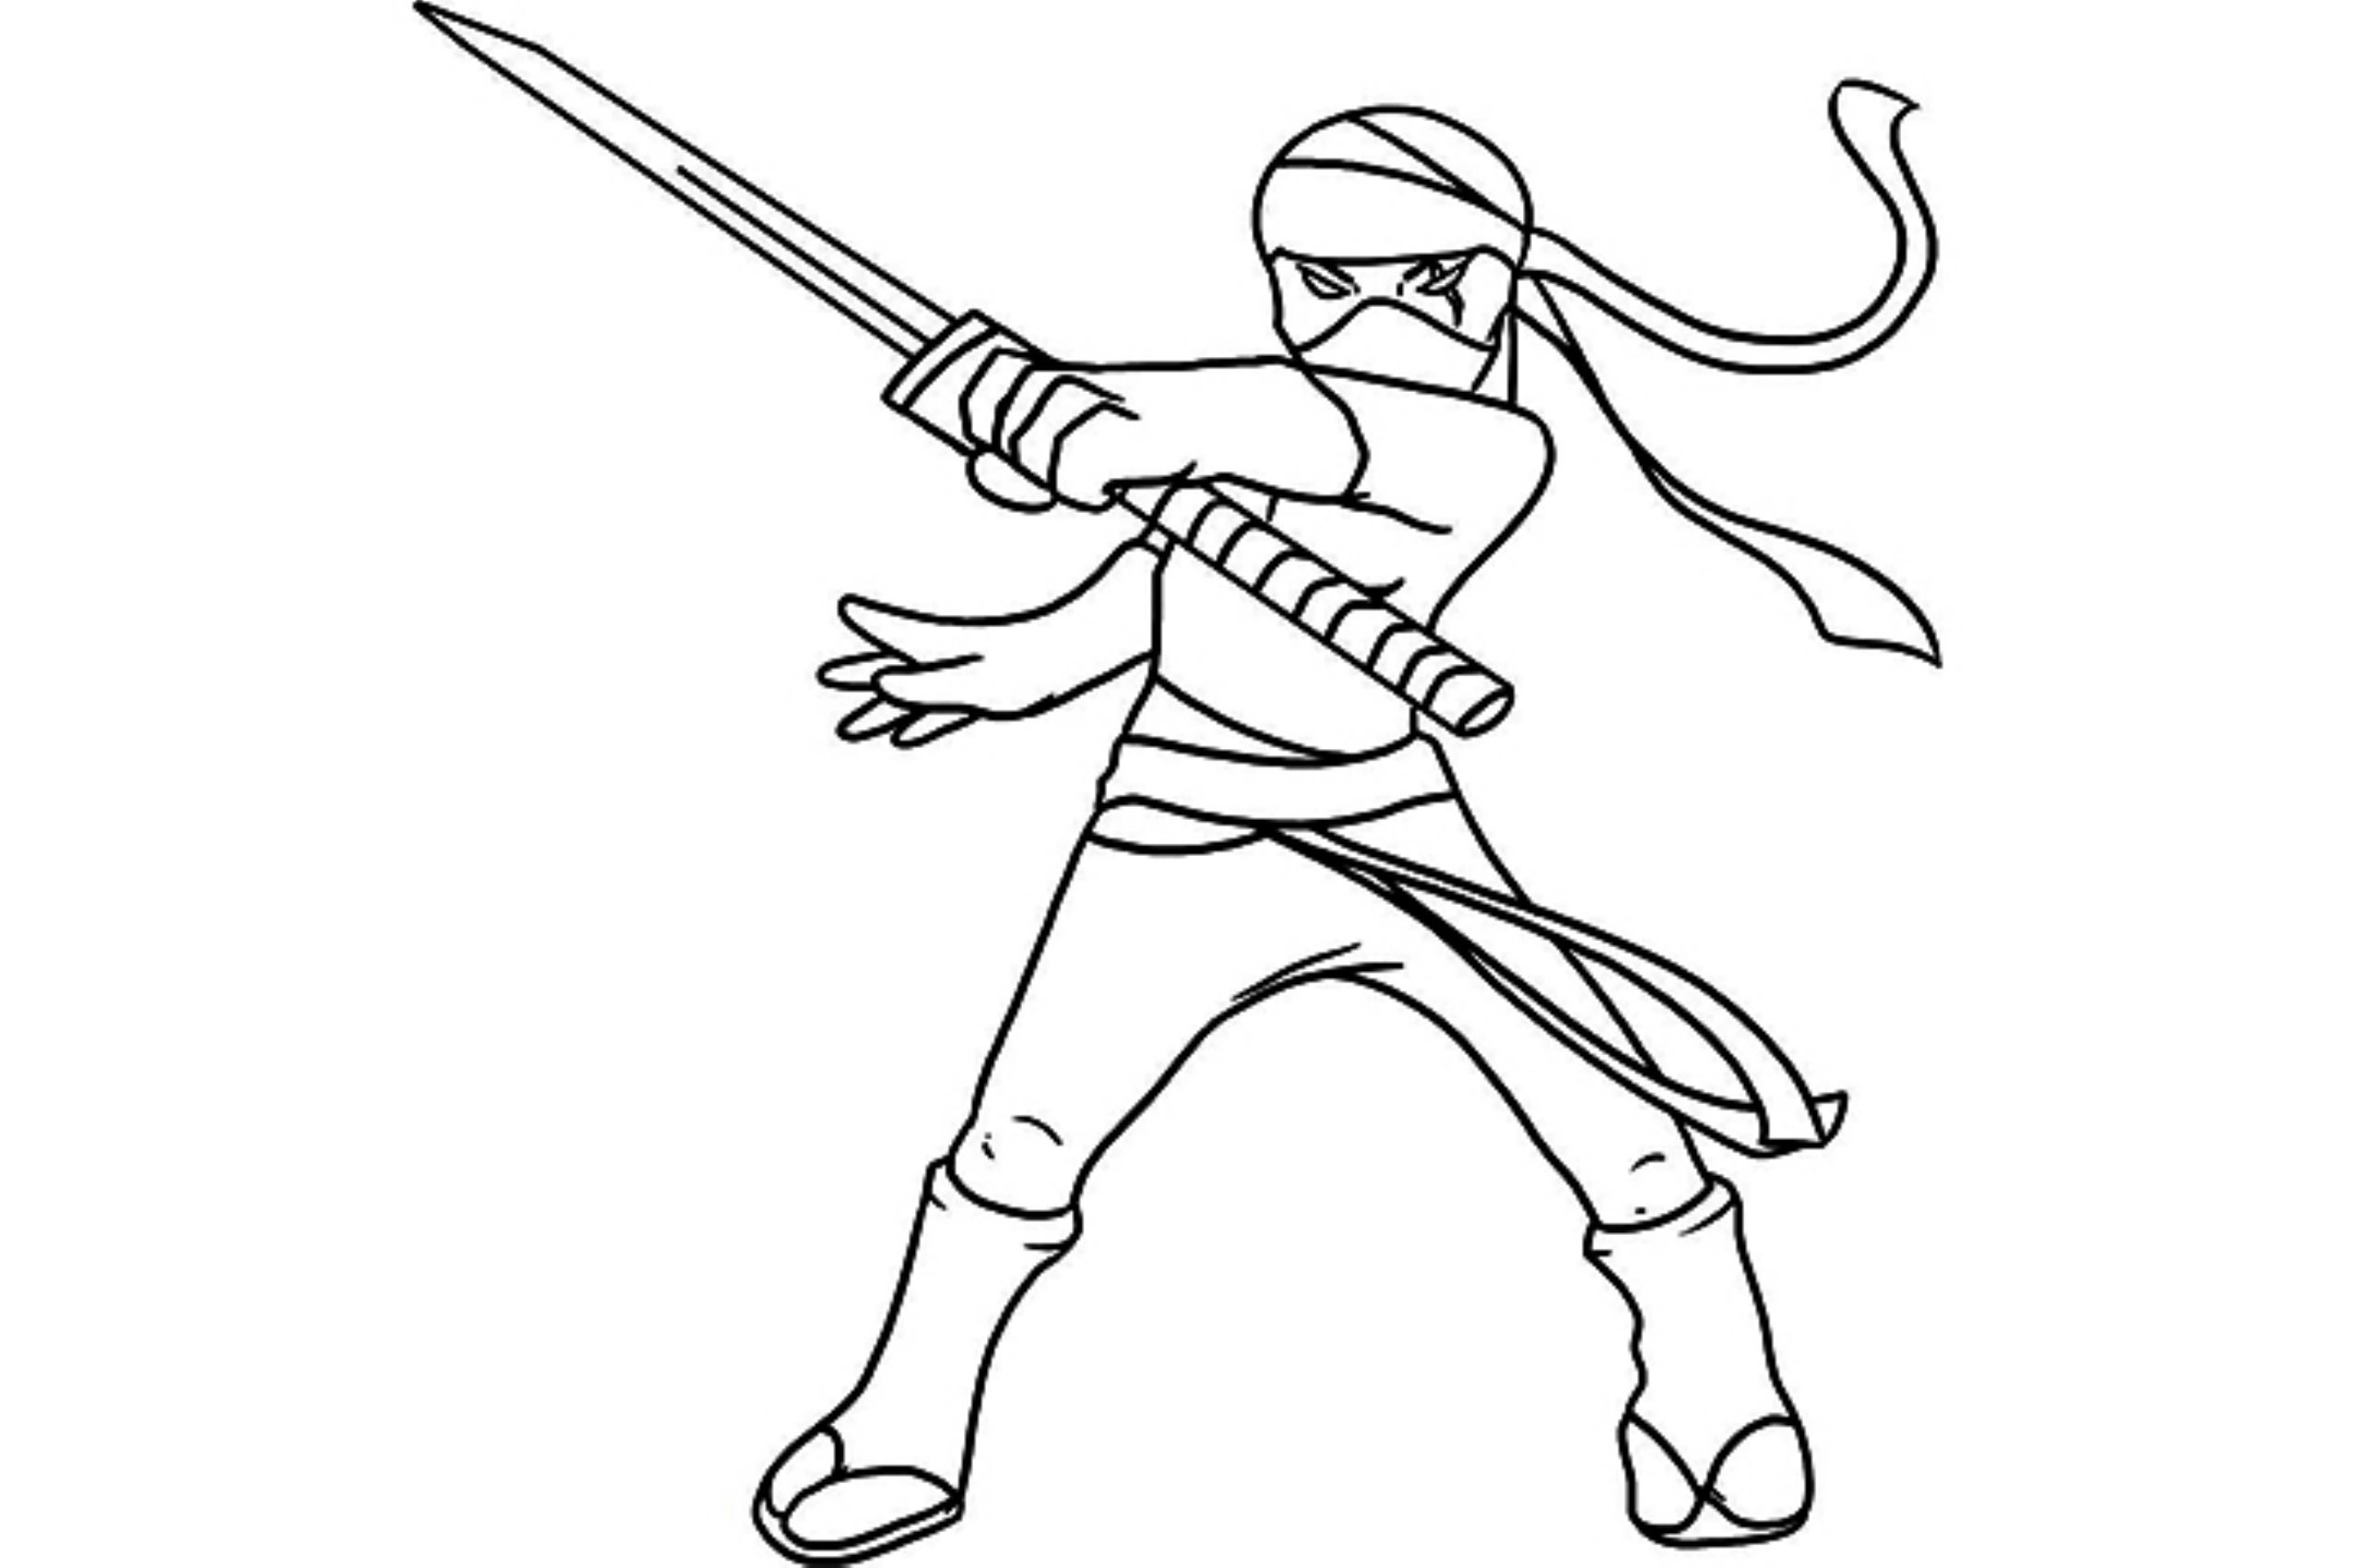 Teenage Ninja Turtles - Coloring Pages for Kids and for Adults